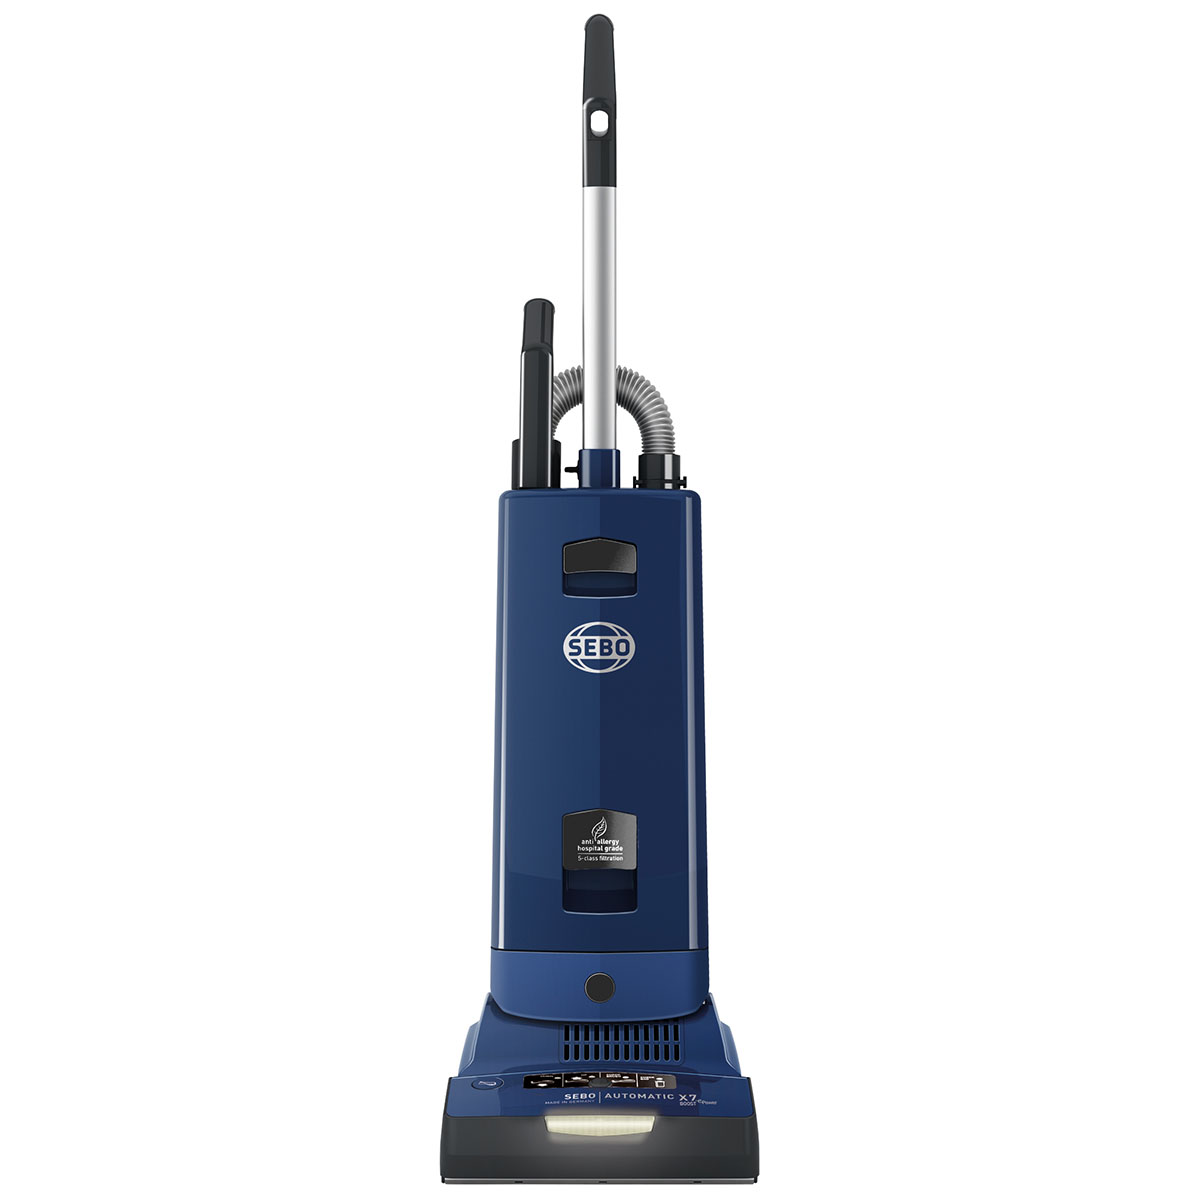 Sebo EB9154 Automatic X7 Boost EPower 890W Bagged Upright Vacuum Cleaner - Navy Blue and Dark Grey